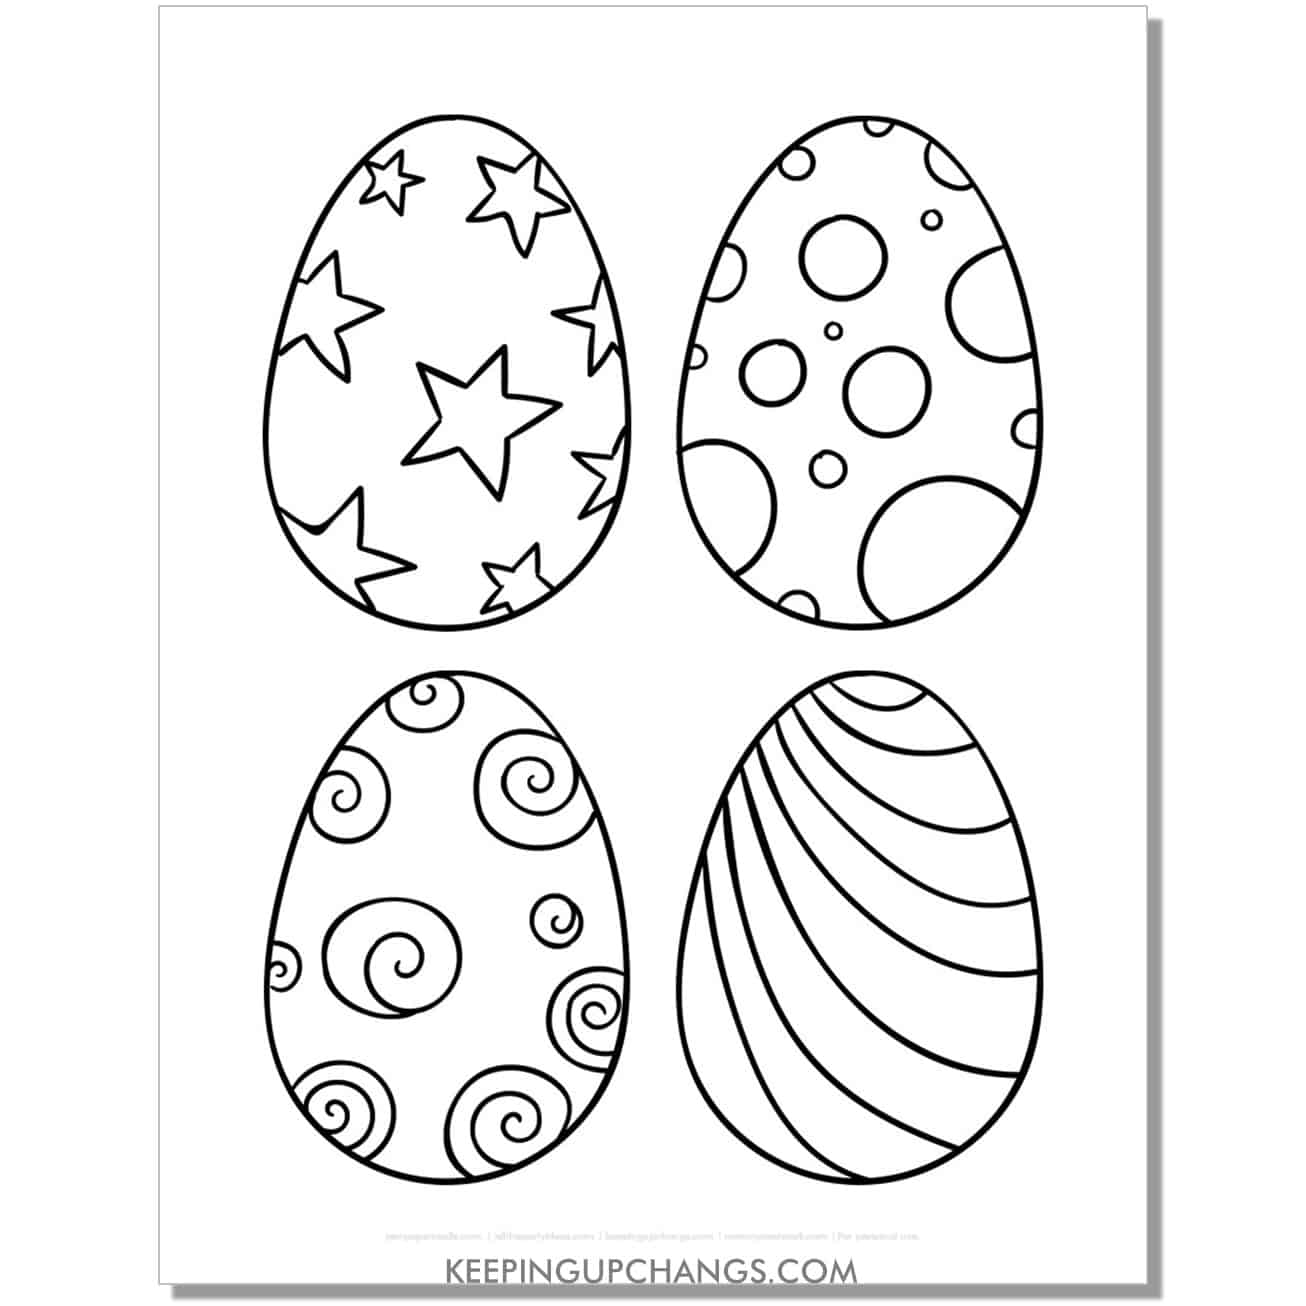 free medium easter eggs with stars, spots, swirls, stripes coloring page, sheet.